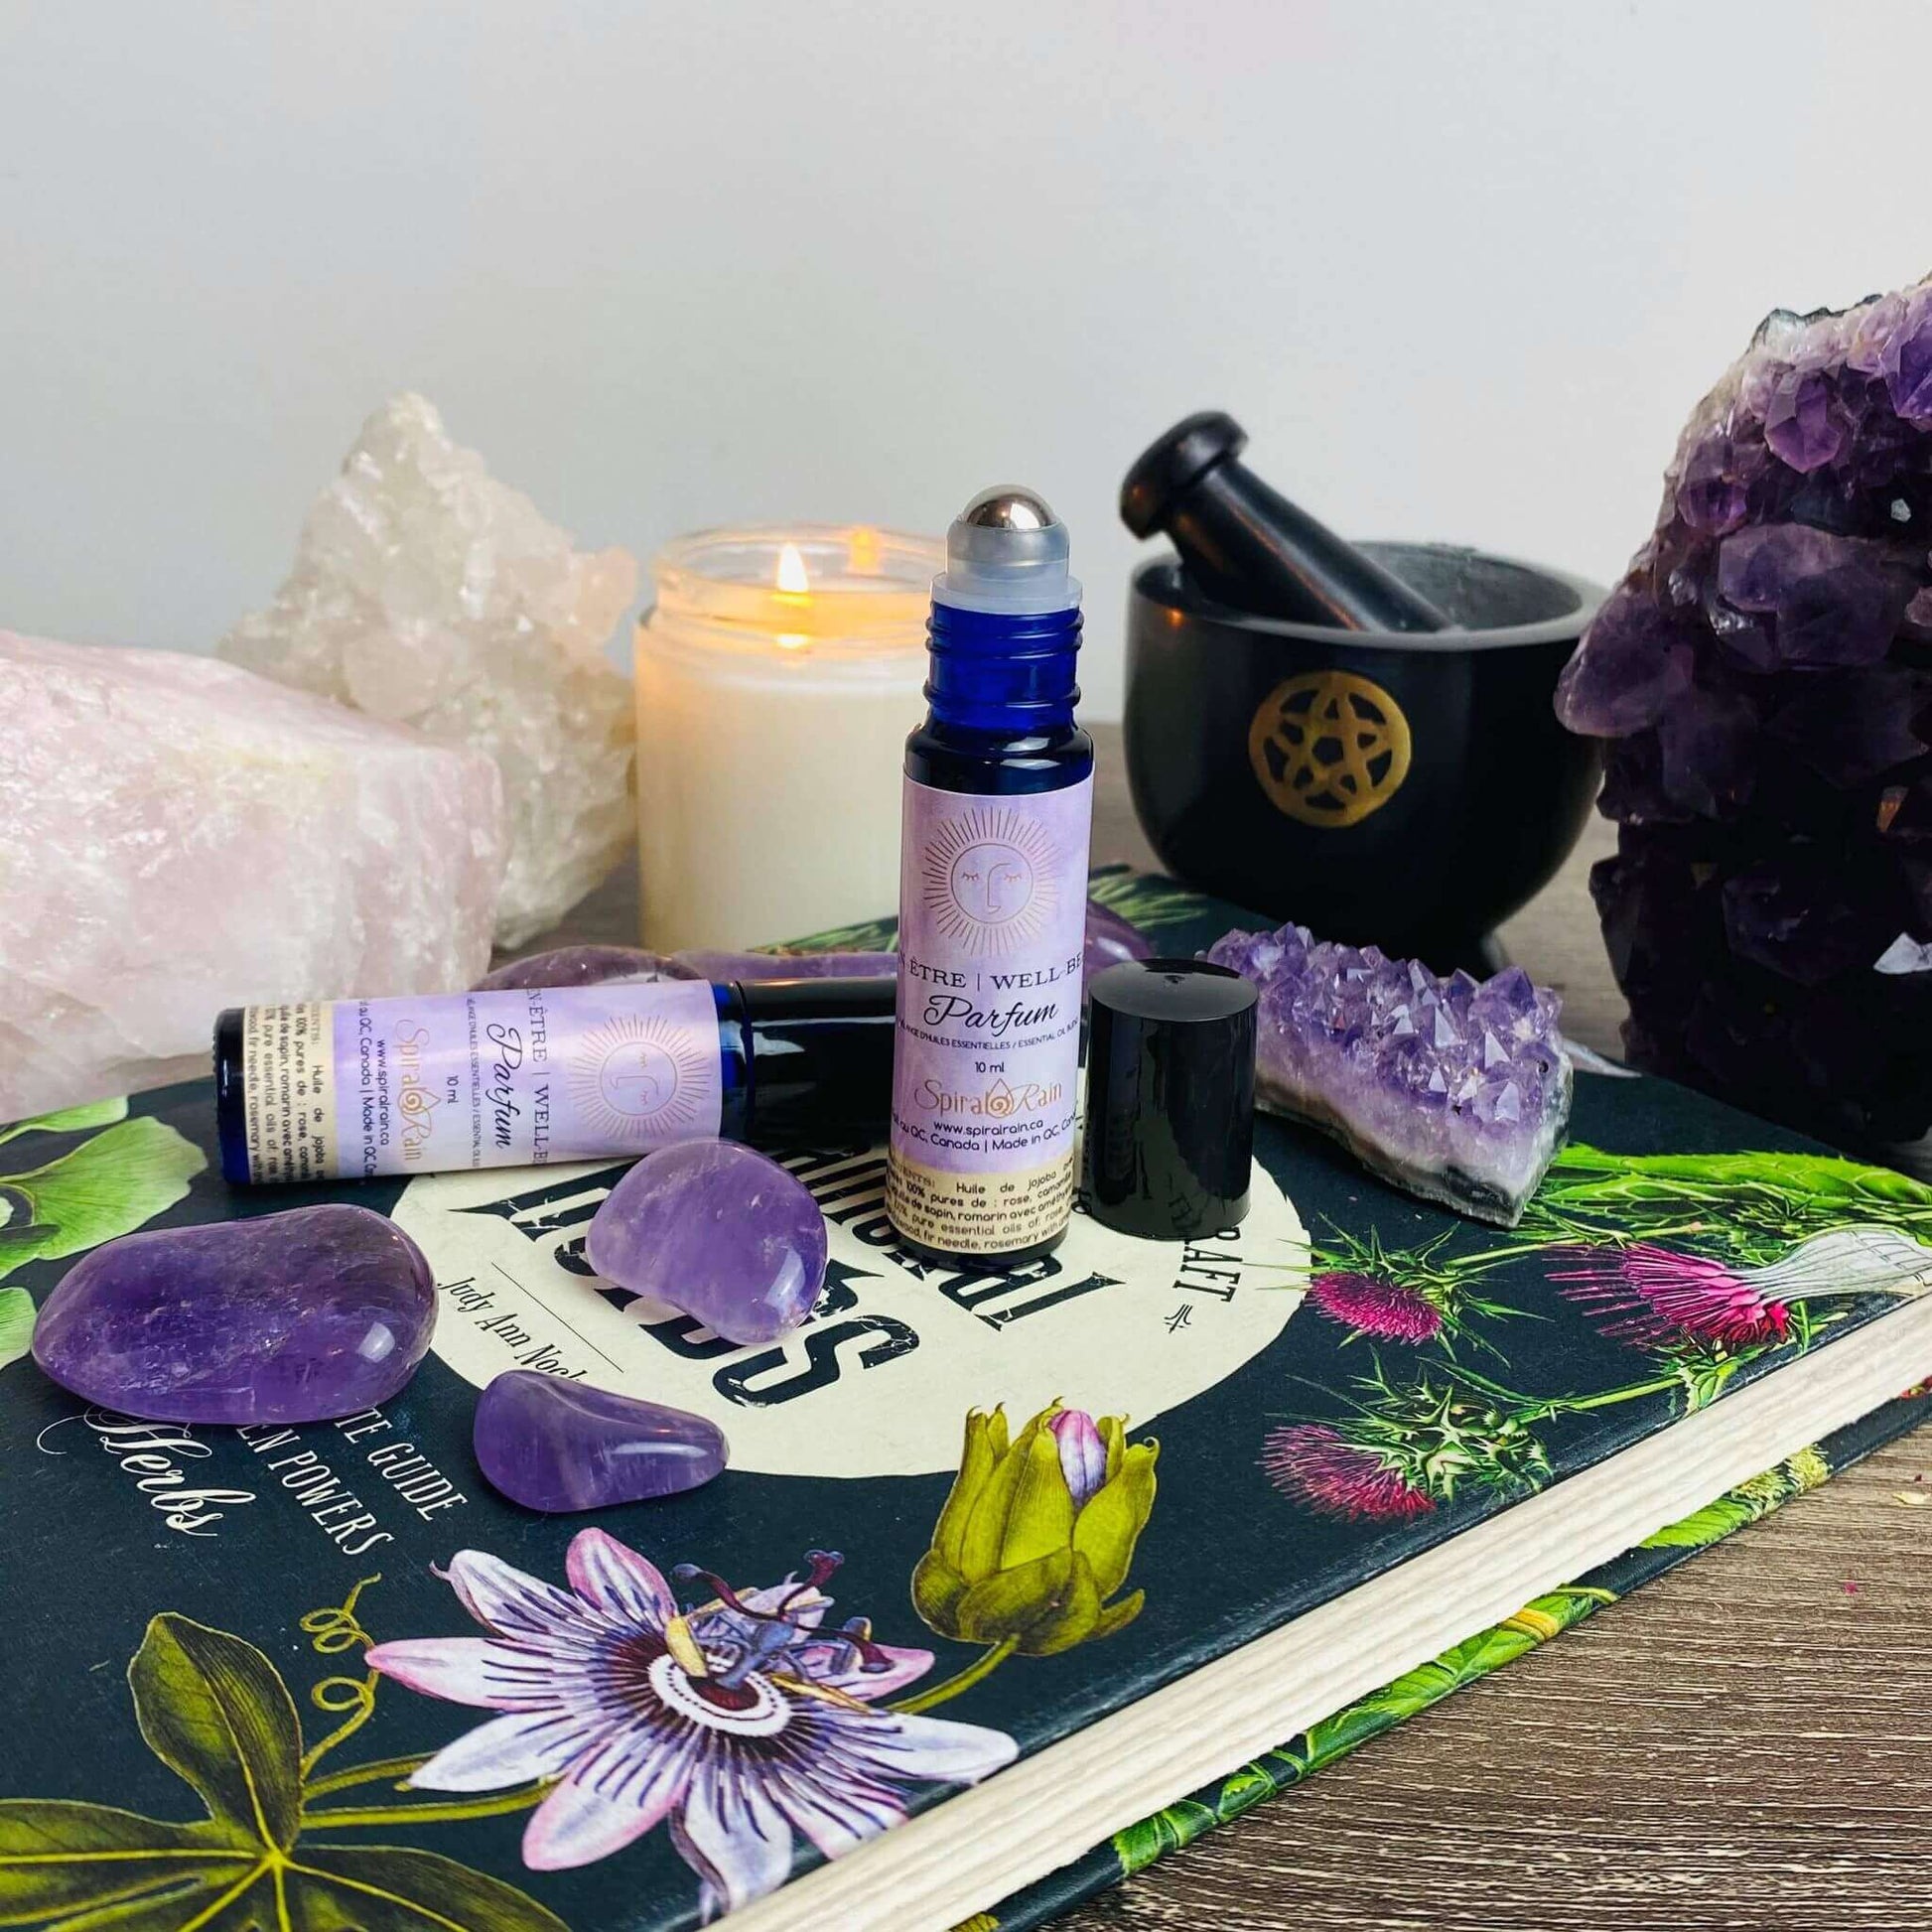 Well-being Box at $85 only from Spiral Rain